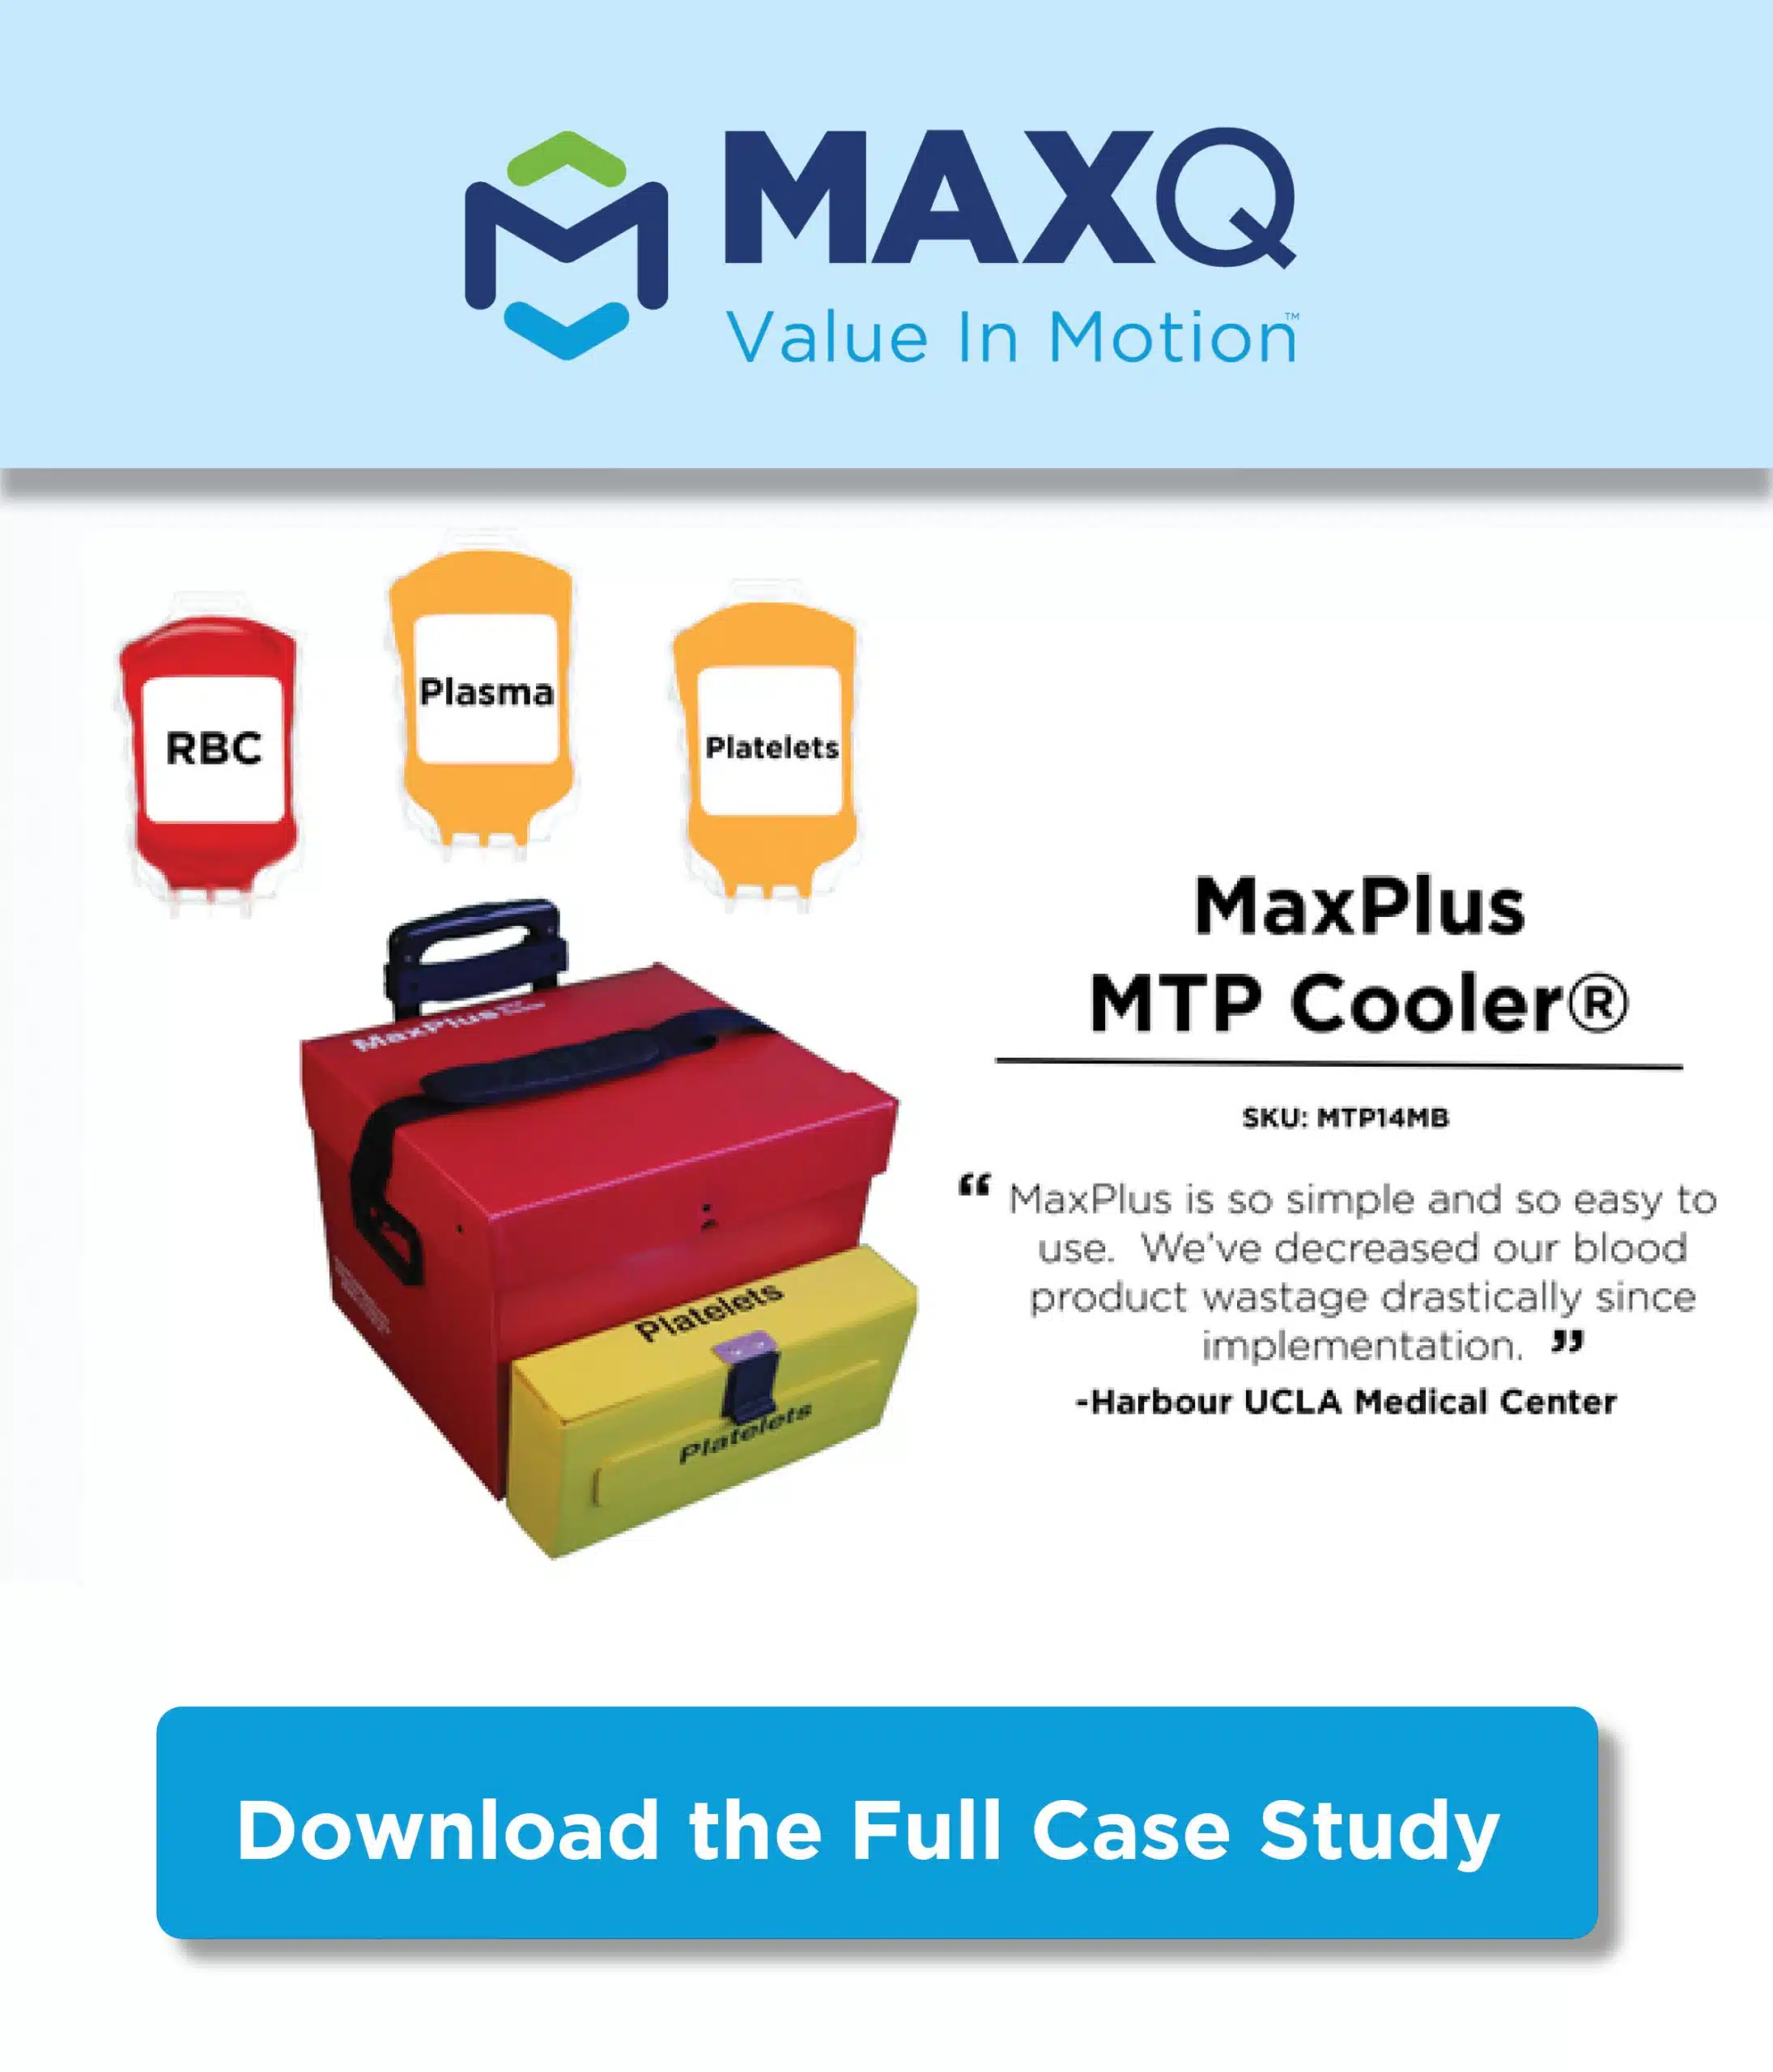 MAXQ-MTP-UCLA-Study-Graphic-scaled-scaled